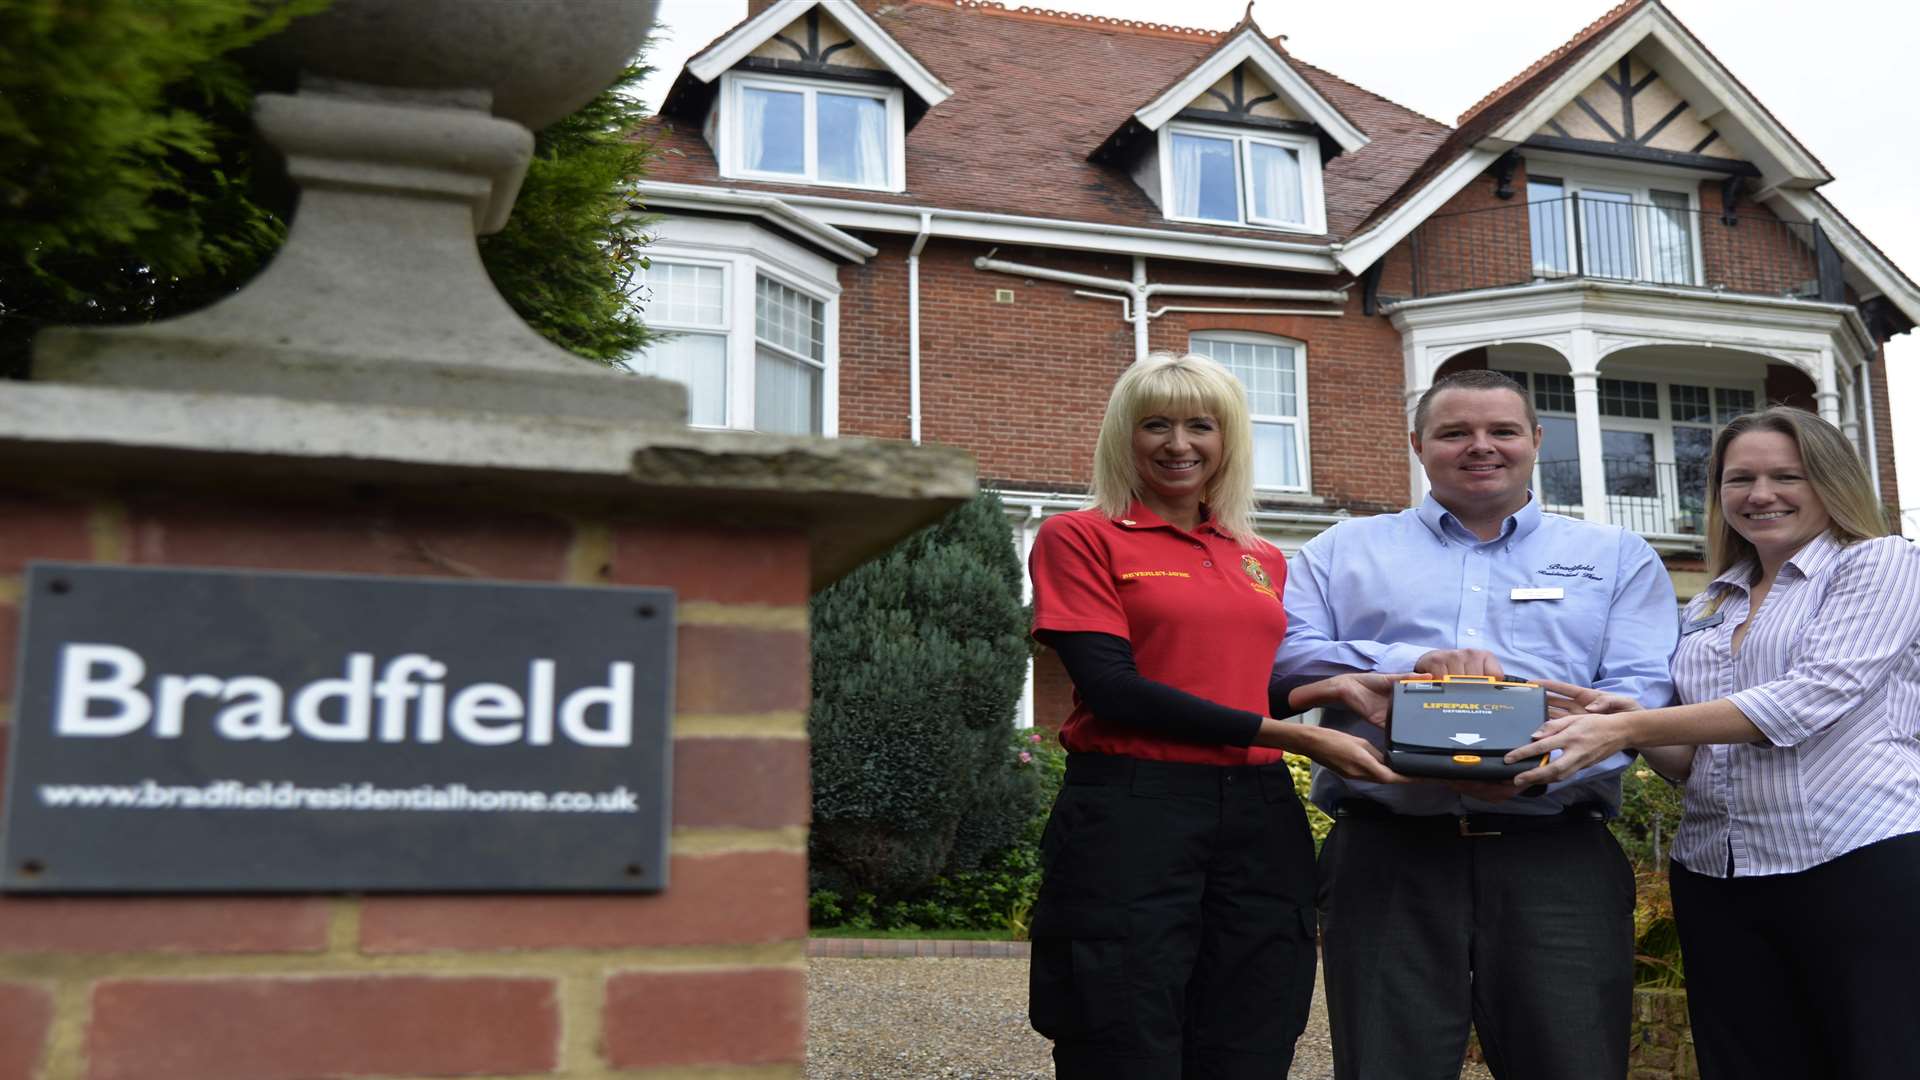 Bradfield Residential Home has purchased a defibrillator that the community can use